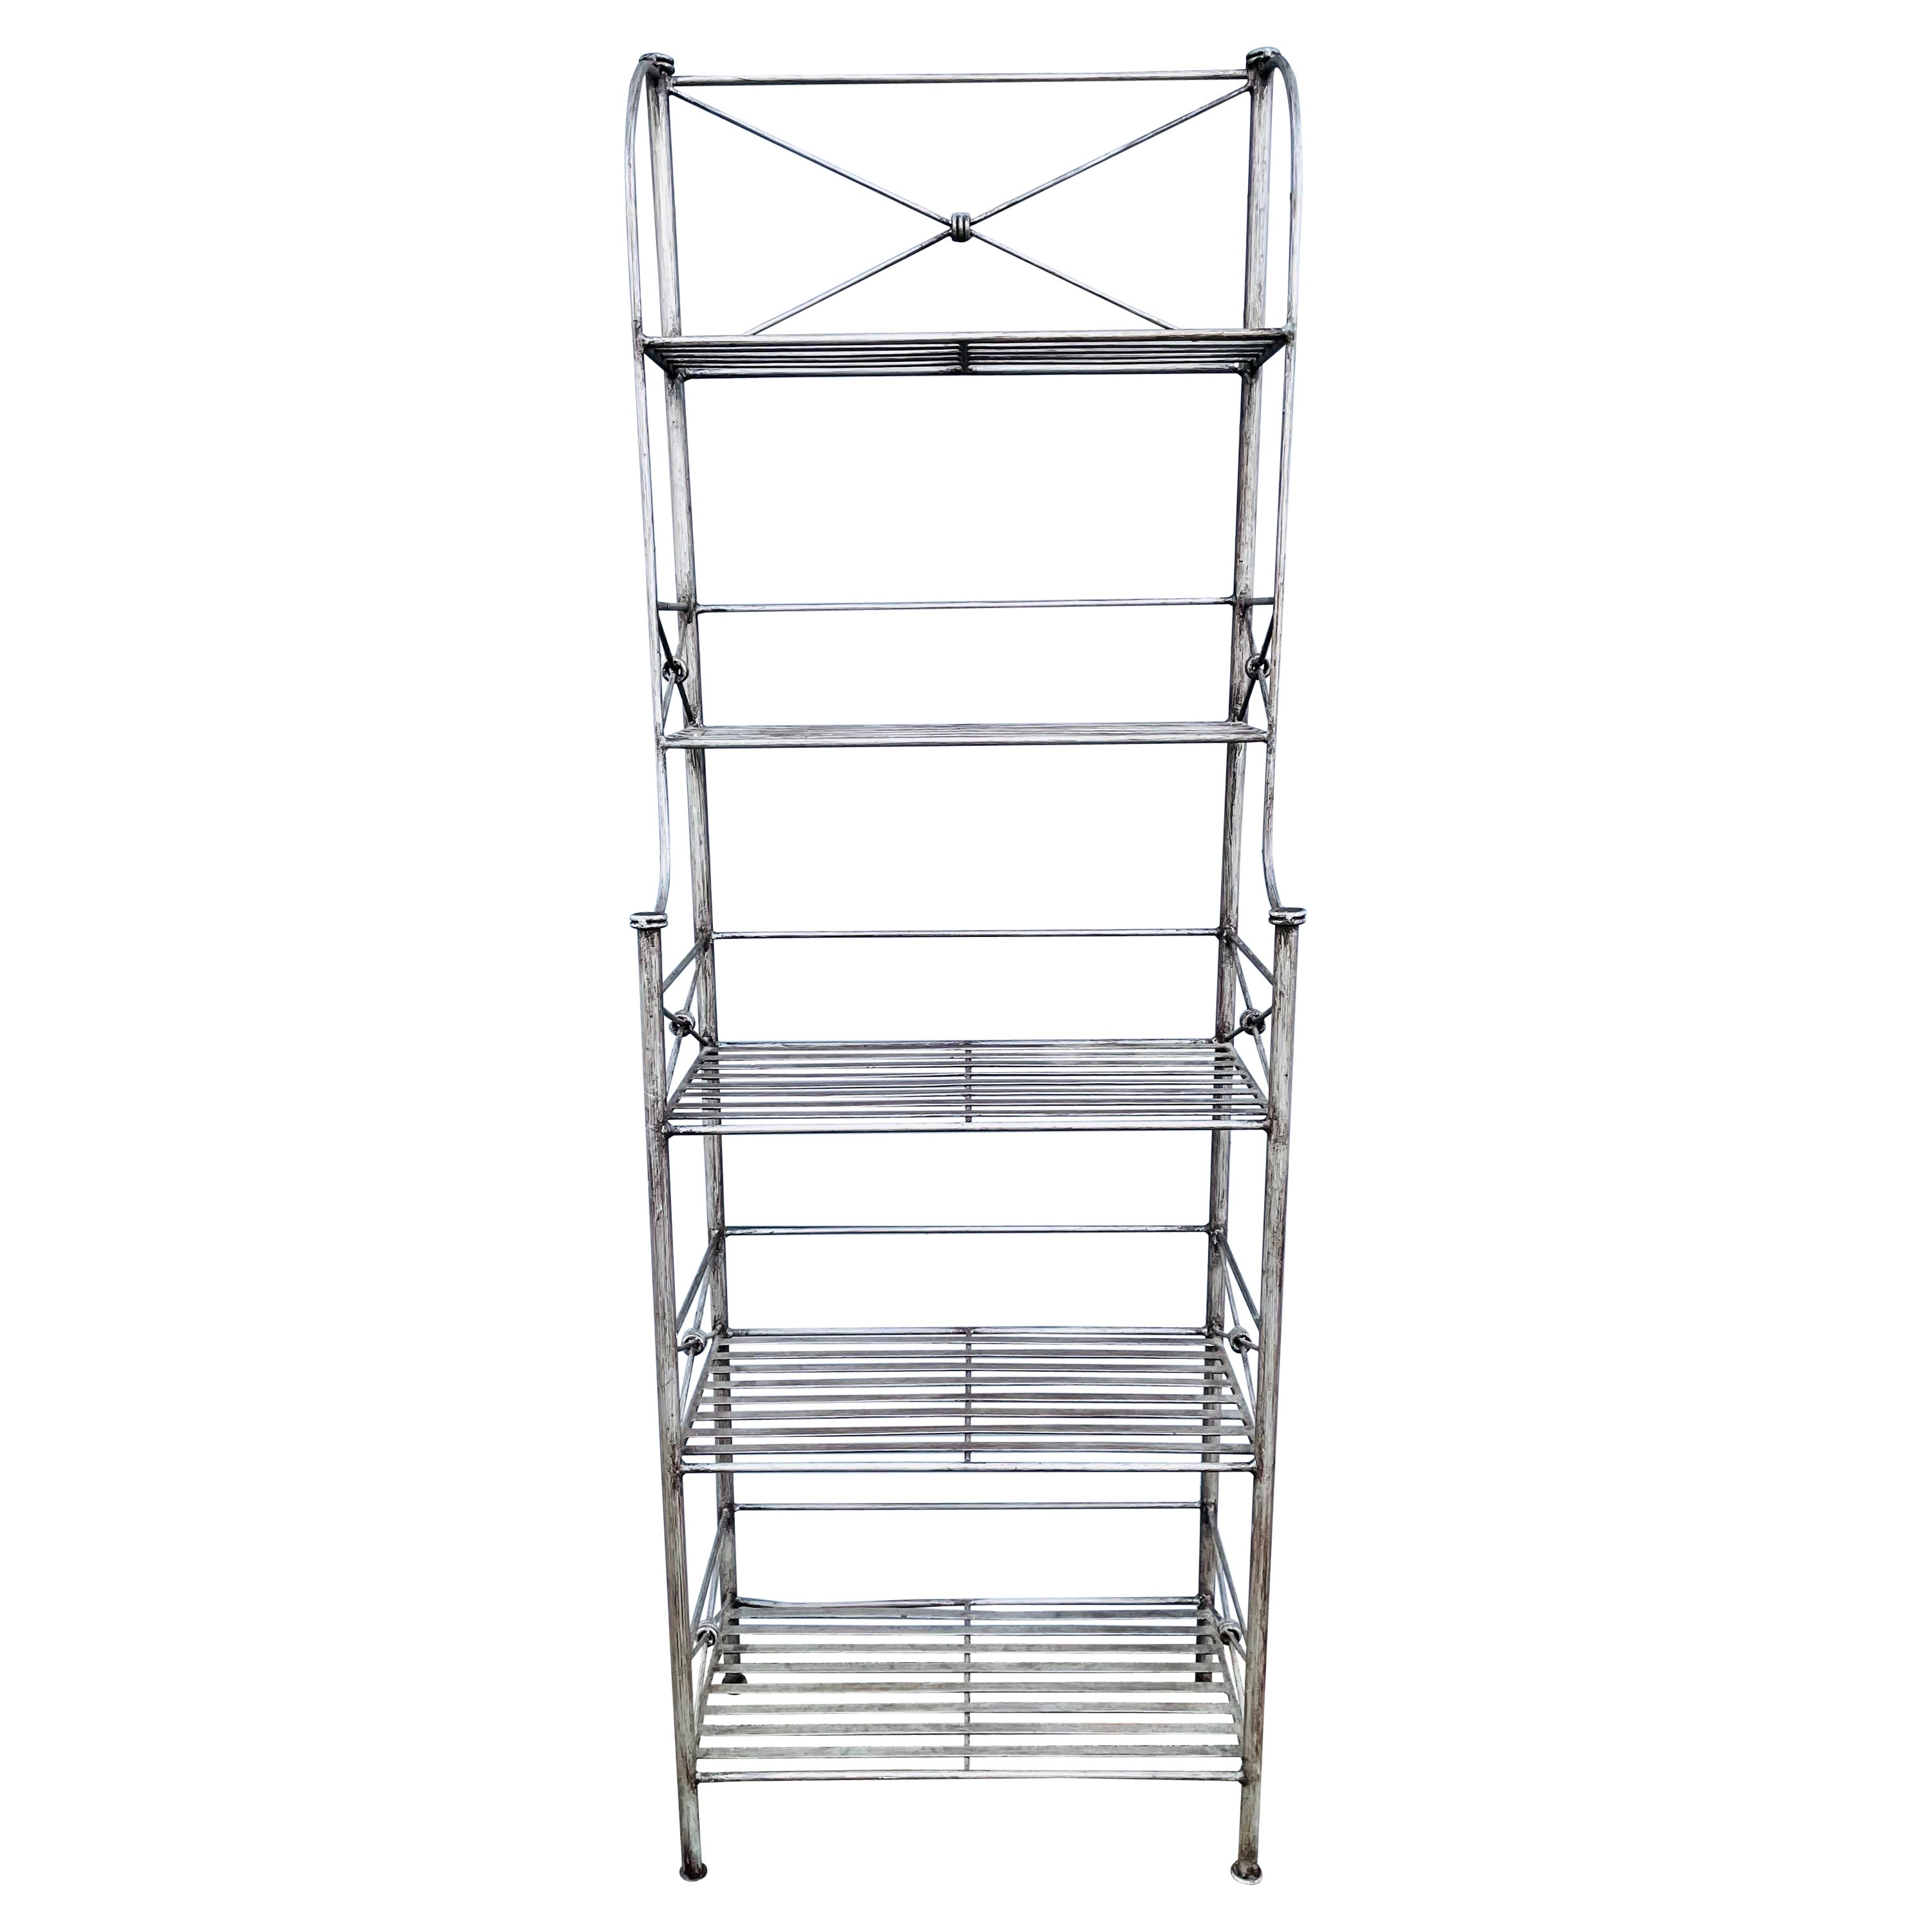 Giacometti inspired wrought iron Bakers Rack